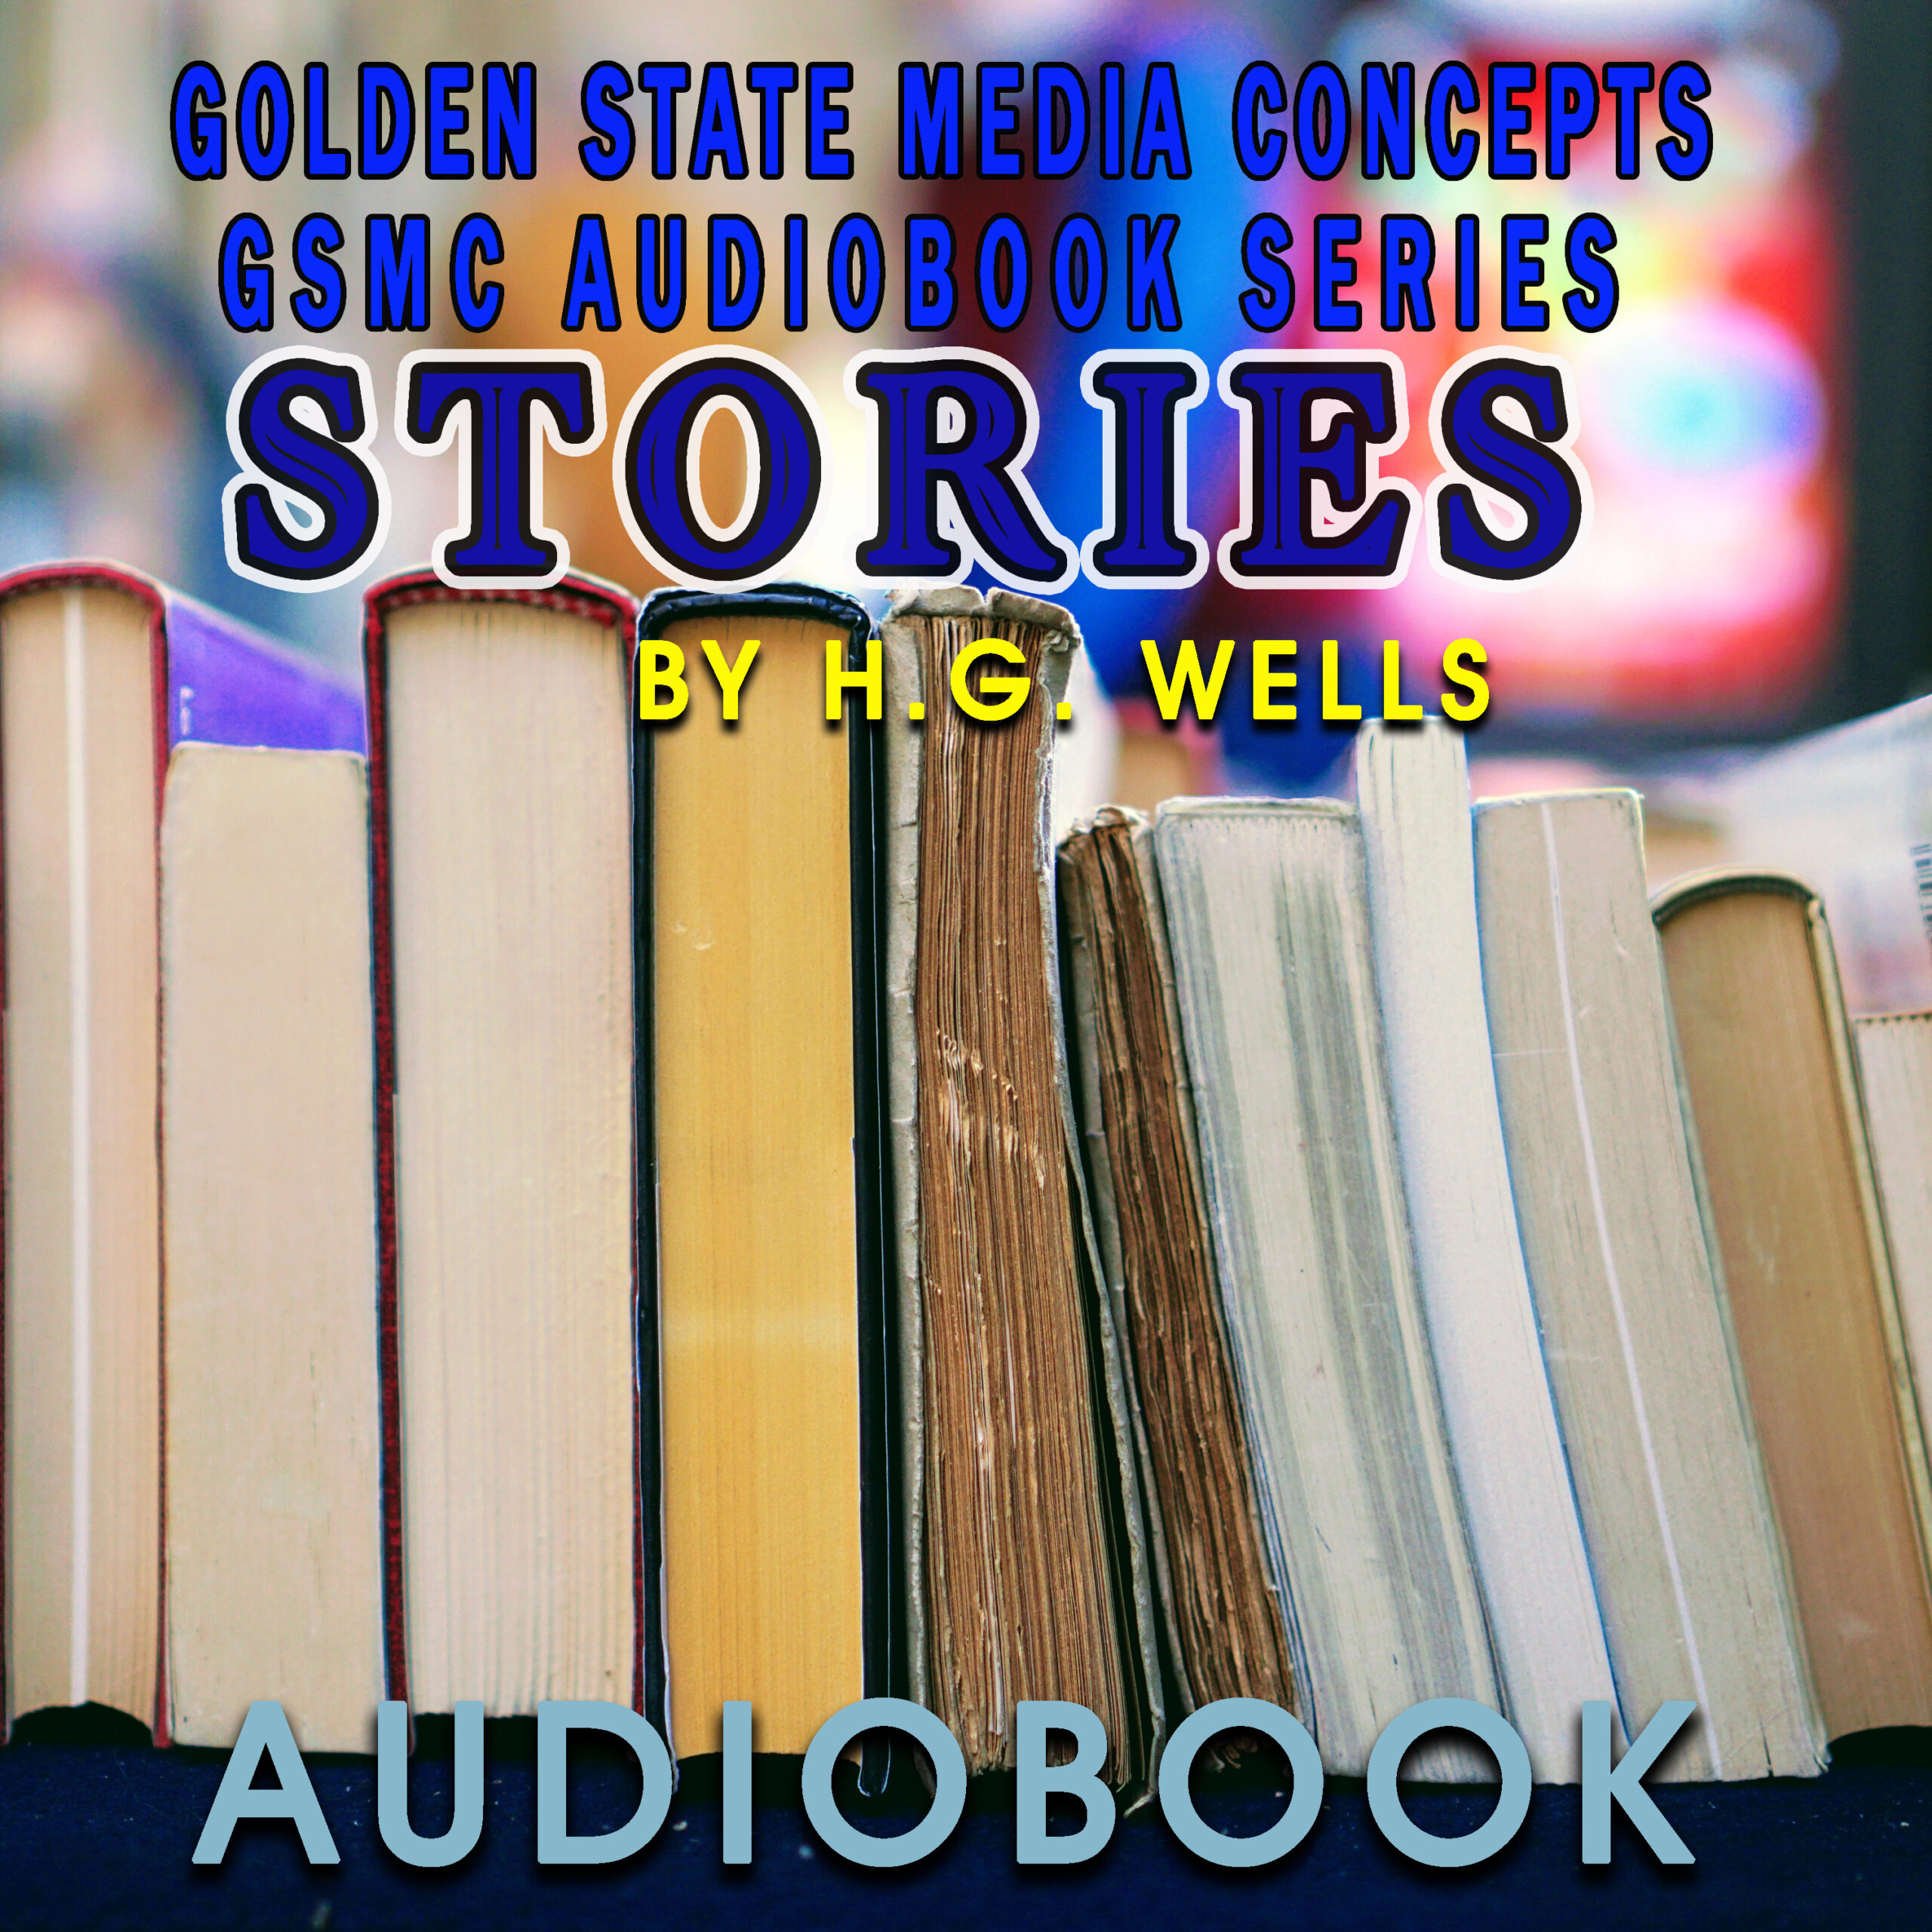 GSMC Audiobook Series: Stories by H.G. Wells